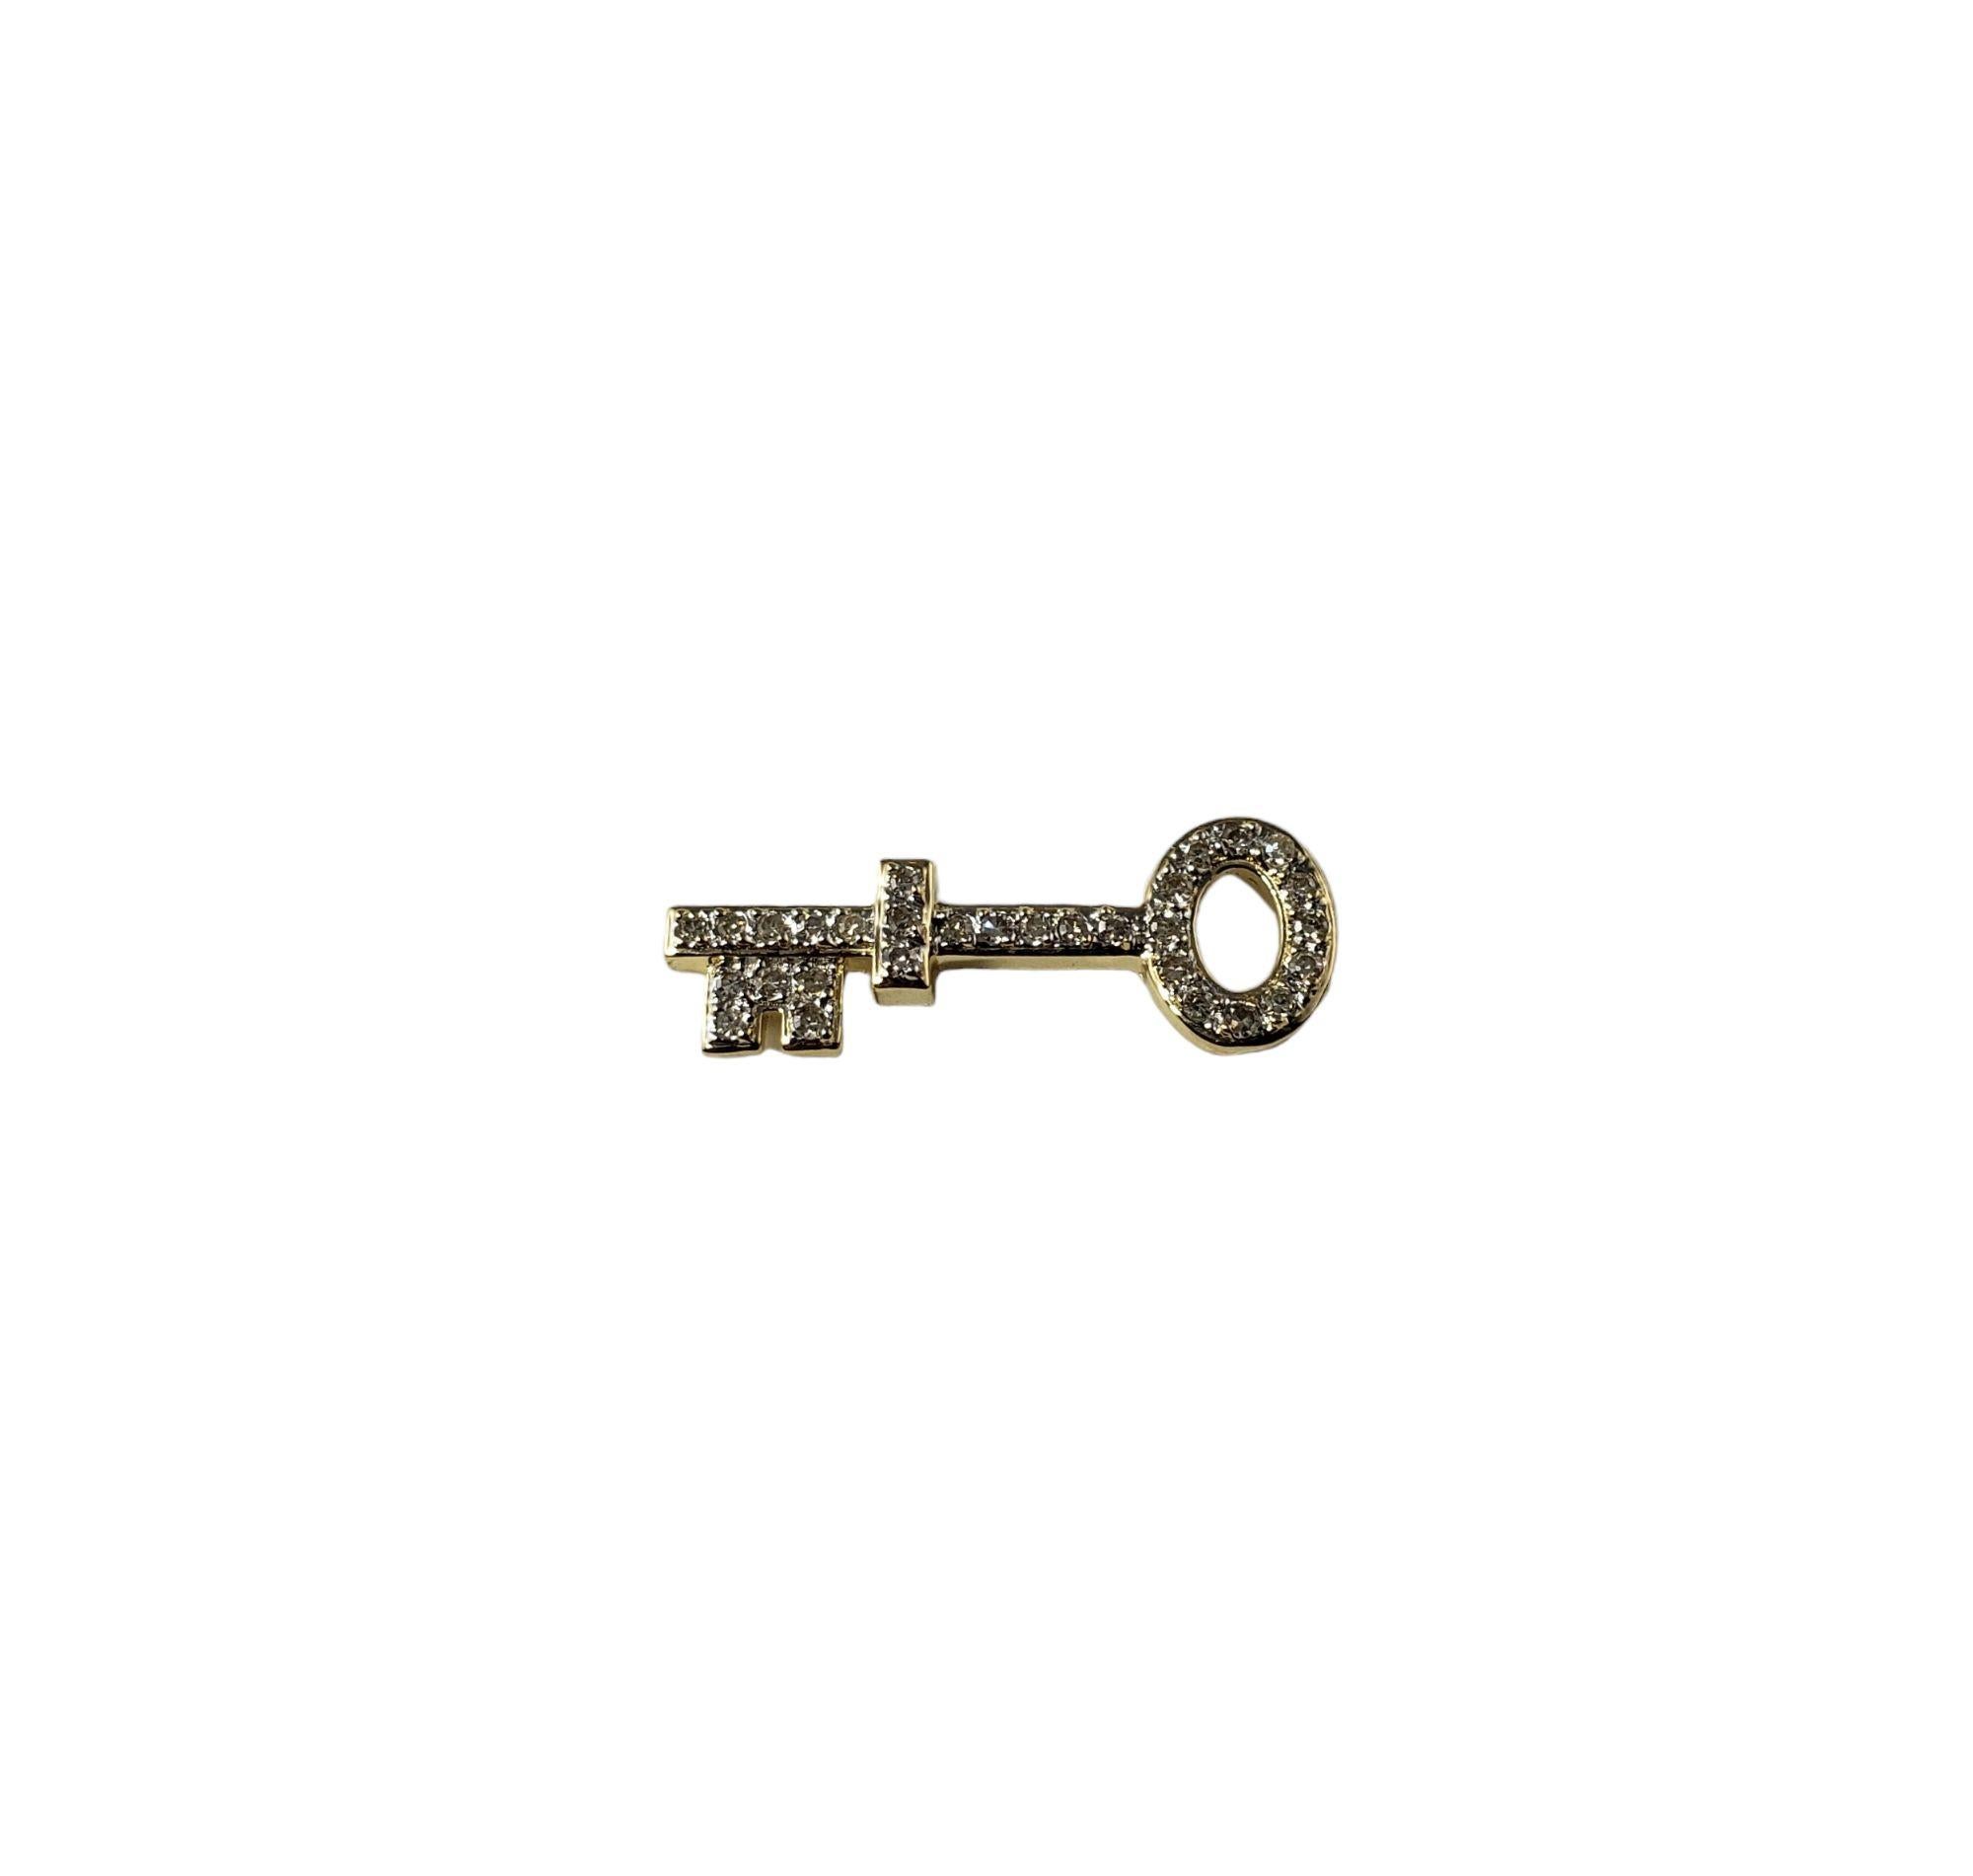 Vintage 14 Karat Yellow Gold and Diamond Key Charm-

This sparkling skeleton key charm is decorated with 30 round single cut diamonds set in classic 14K yellow gold.

Approximate total diamond weight: .15 ct.

Diamond color: I-J

Diamond clarity: